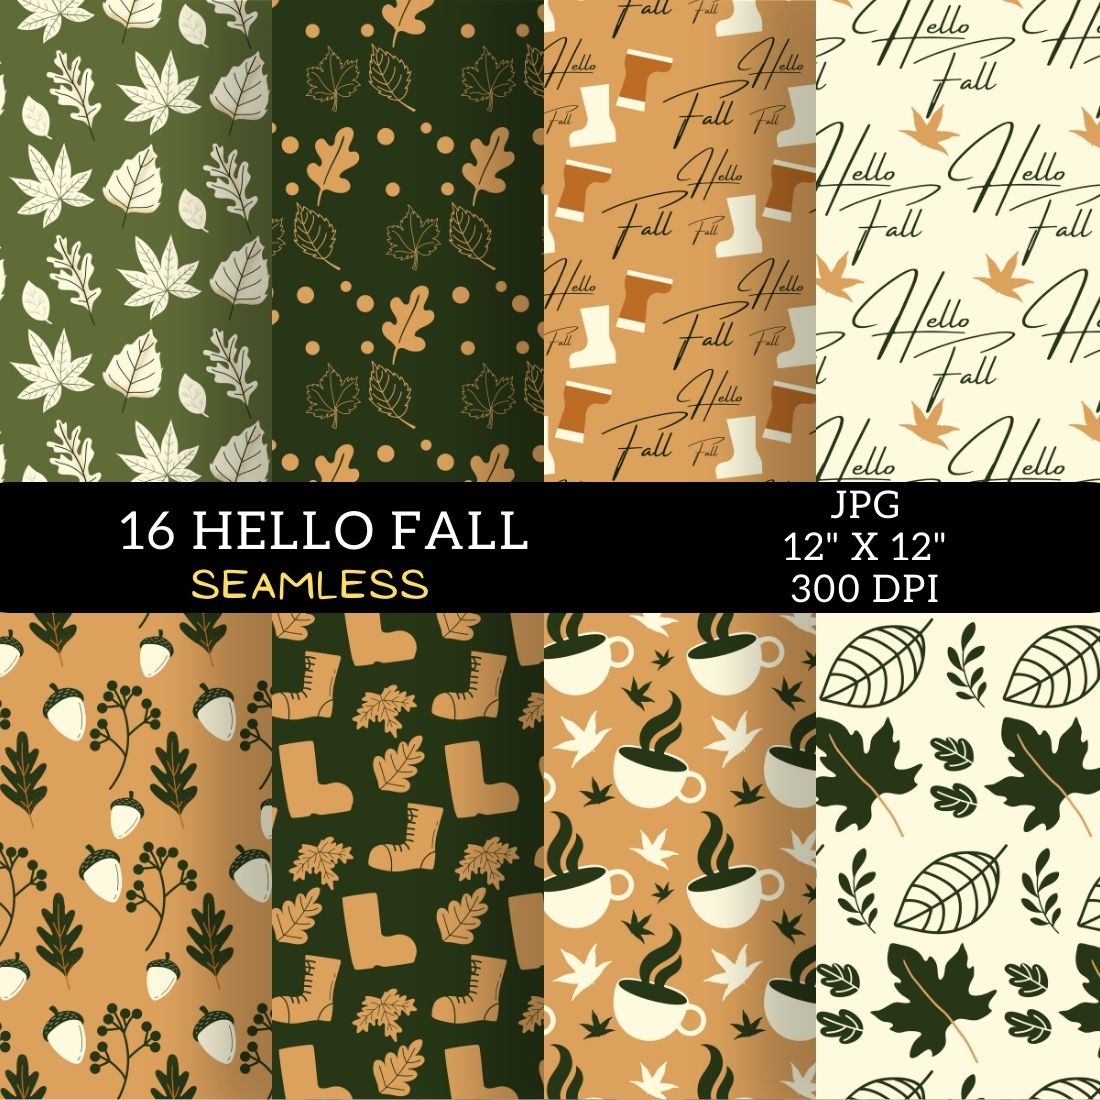 Pack of unique background patterns on the theme of autumn.